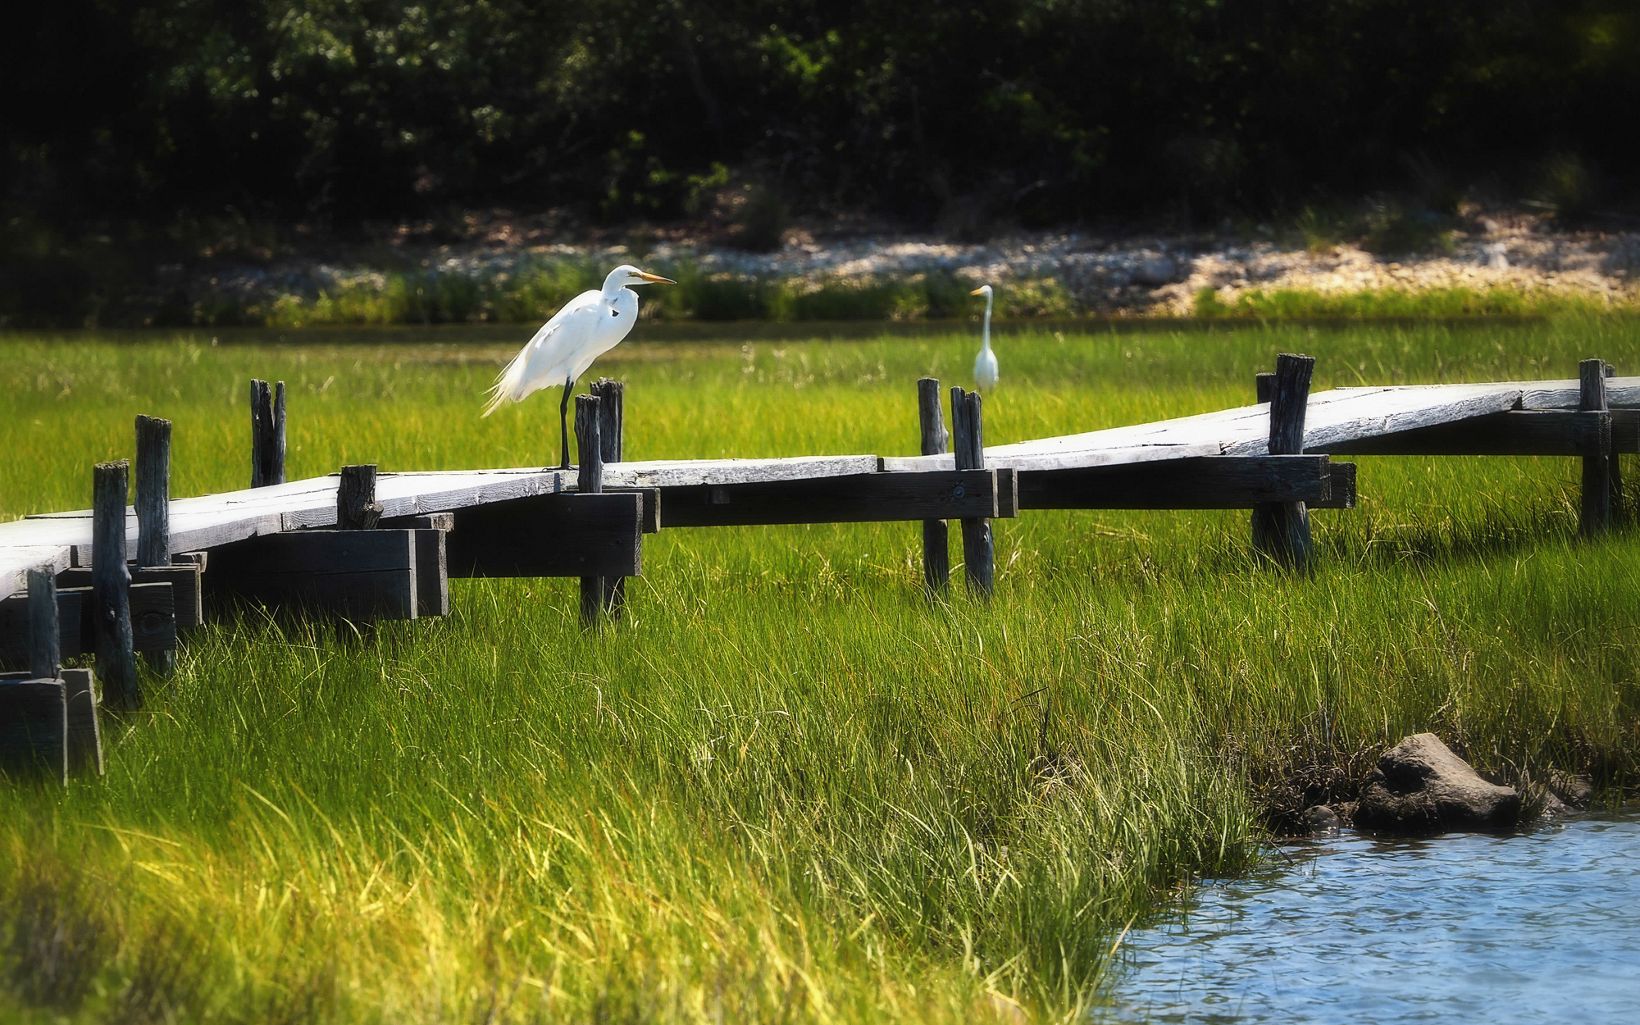 You can hike to Mashomack Nature Preserve from West Neck Harbour, and kayak in its bird-filled creeks